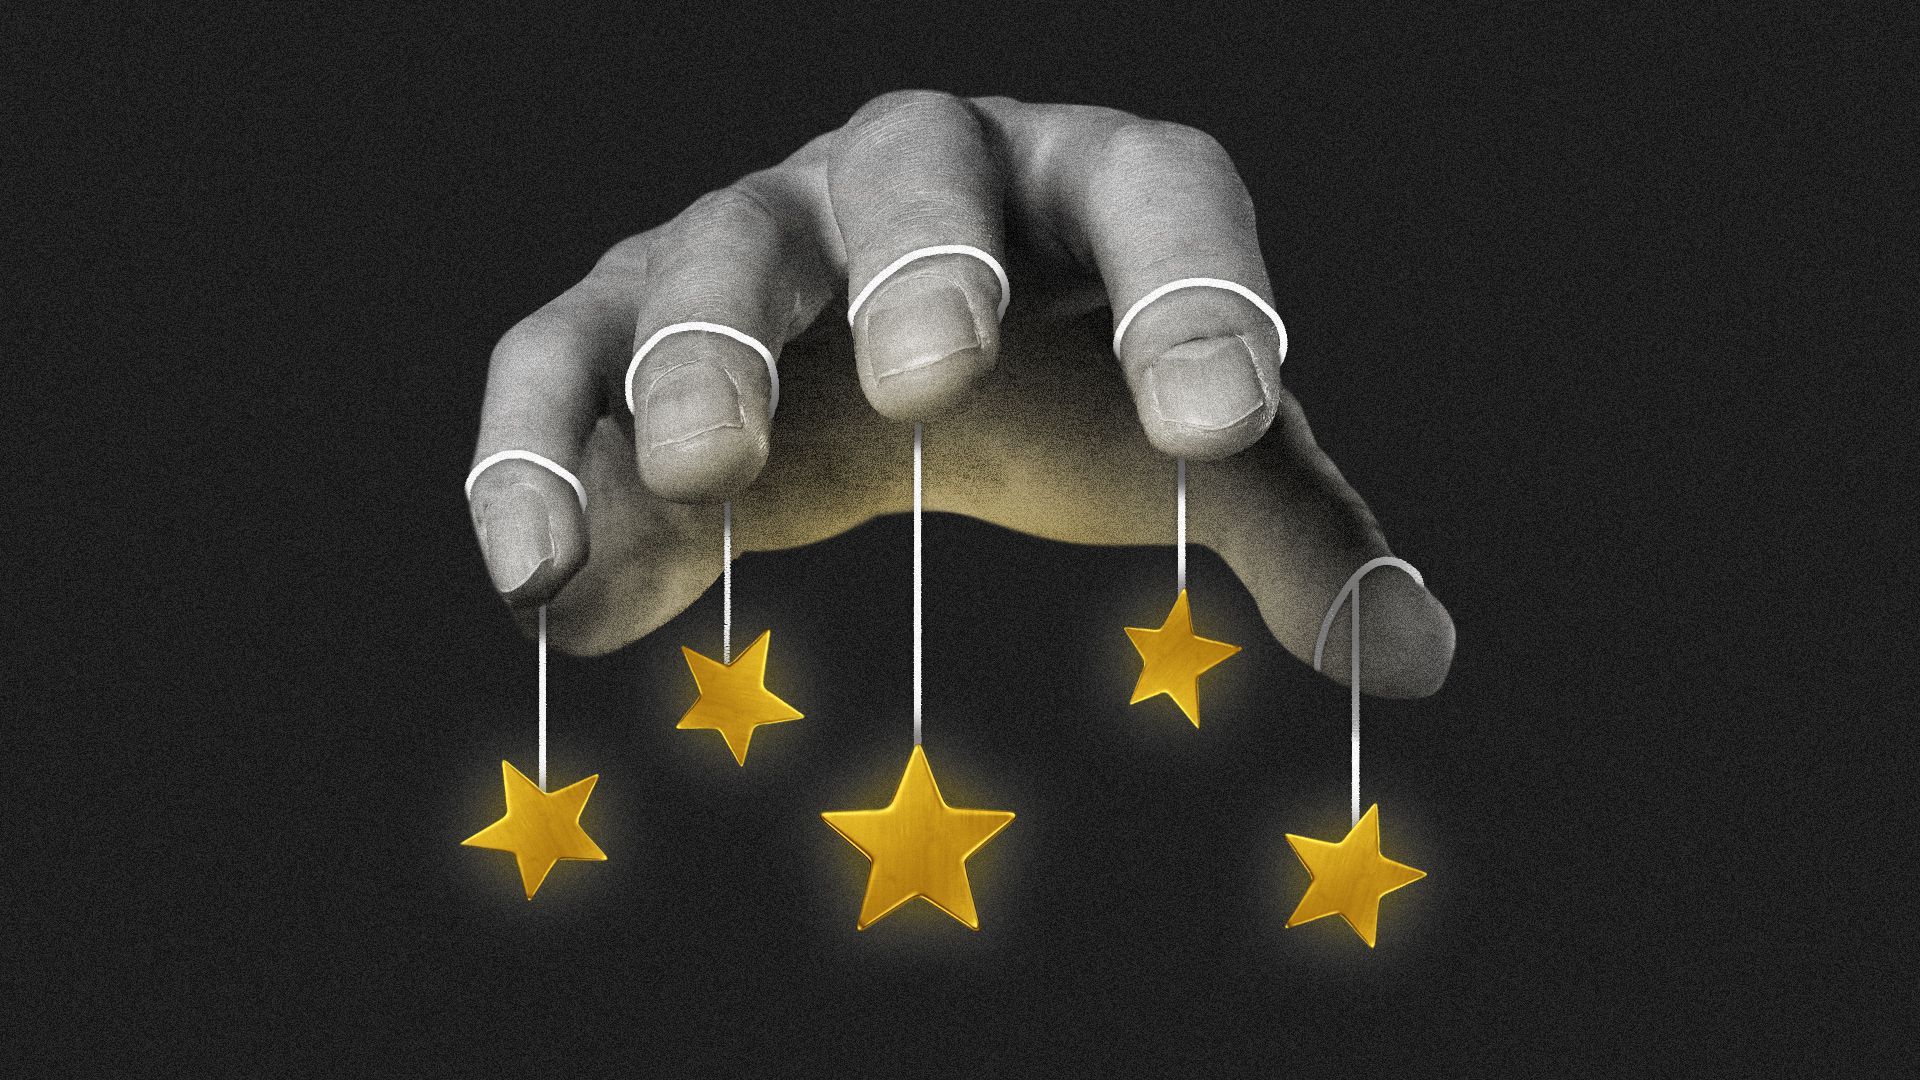 Illustration of an outstretched hand with strings on each finger attached to glowing stars hanging below it